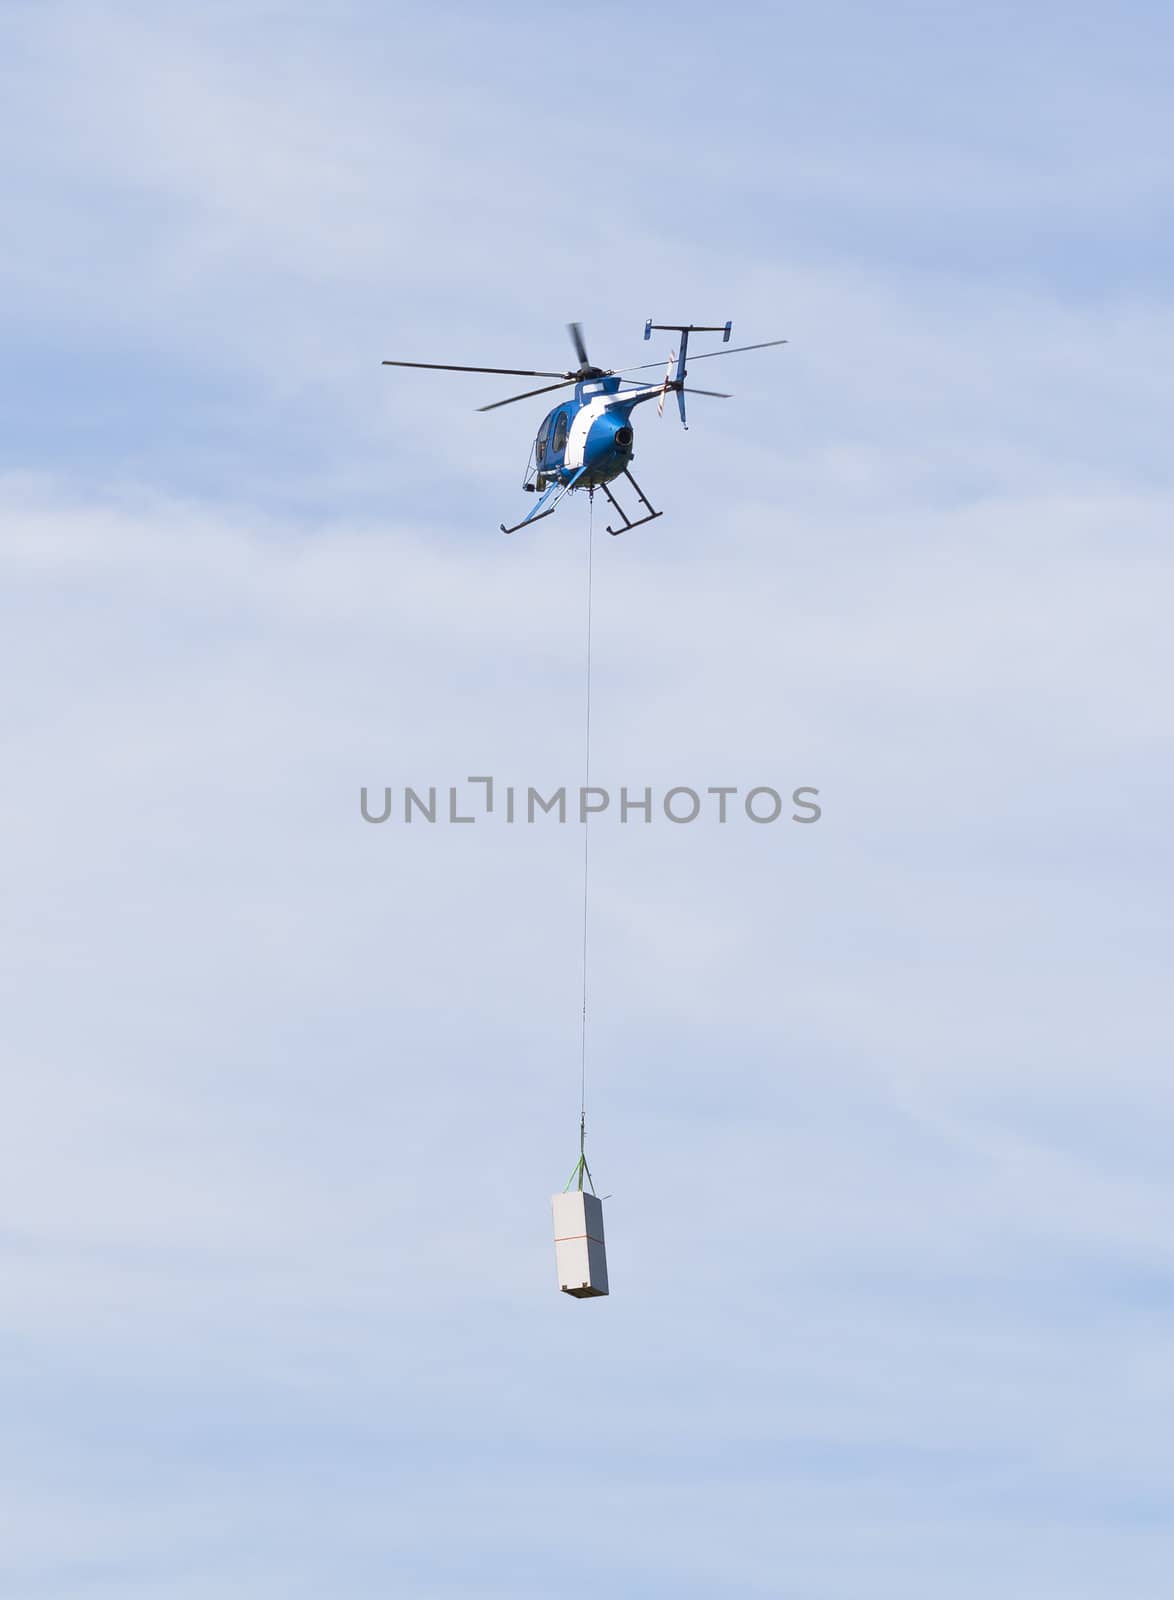 Helicopter carrying a load by Jupe